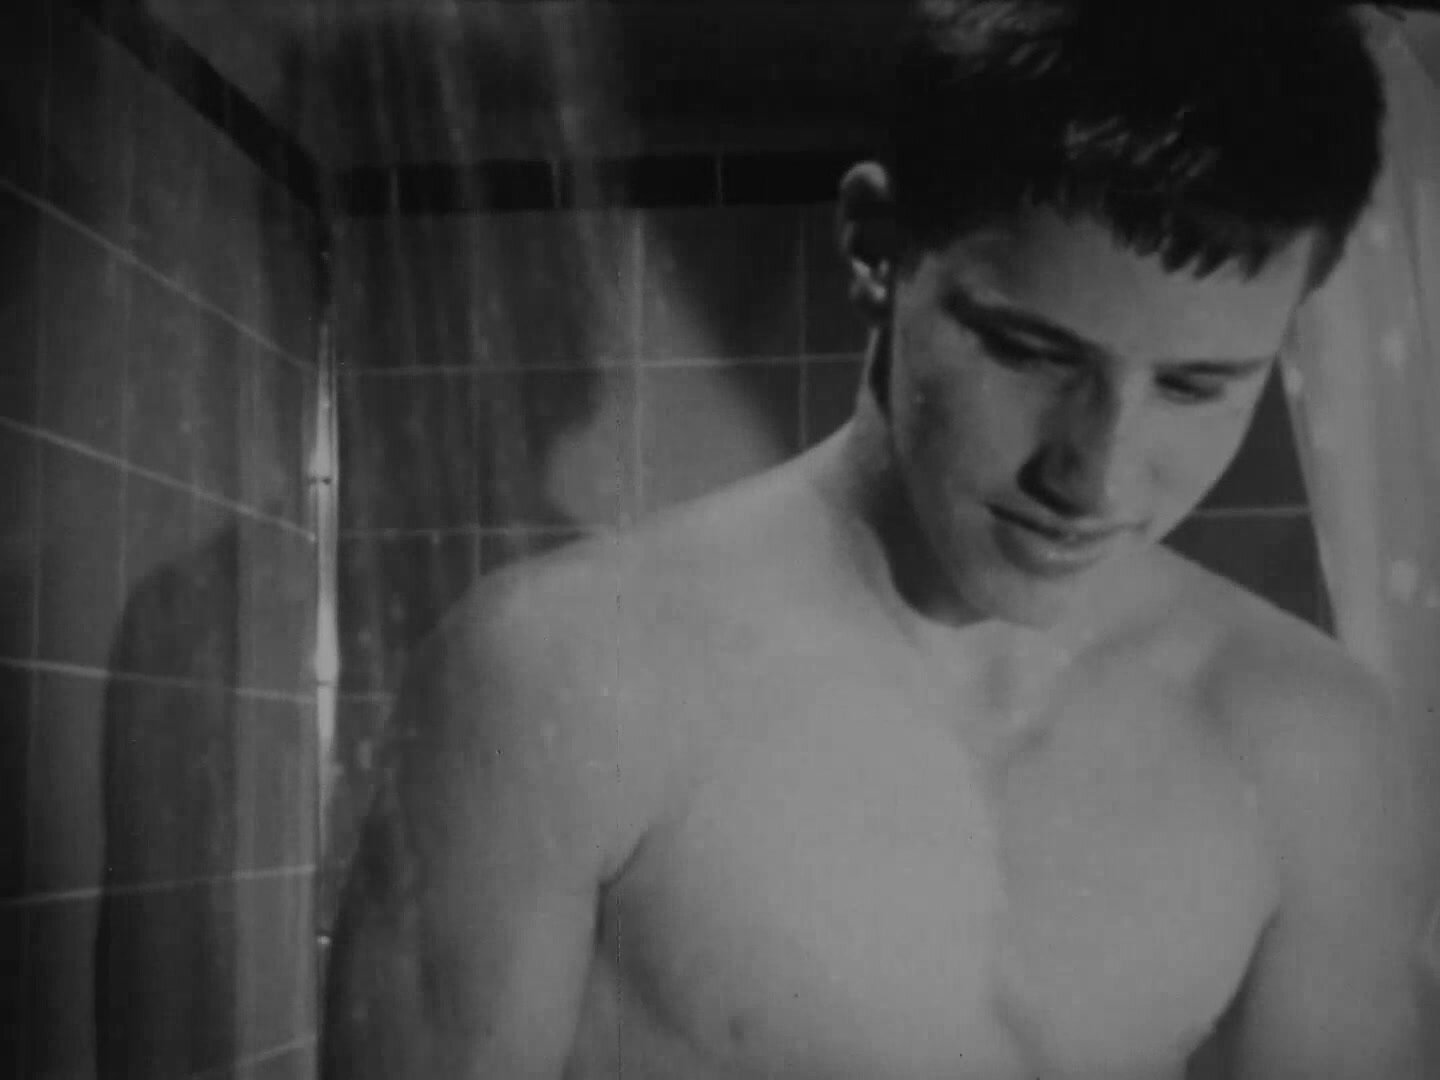 Naked Boy in 1950s Educational Film